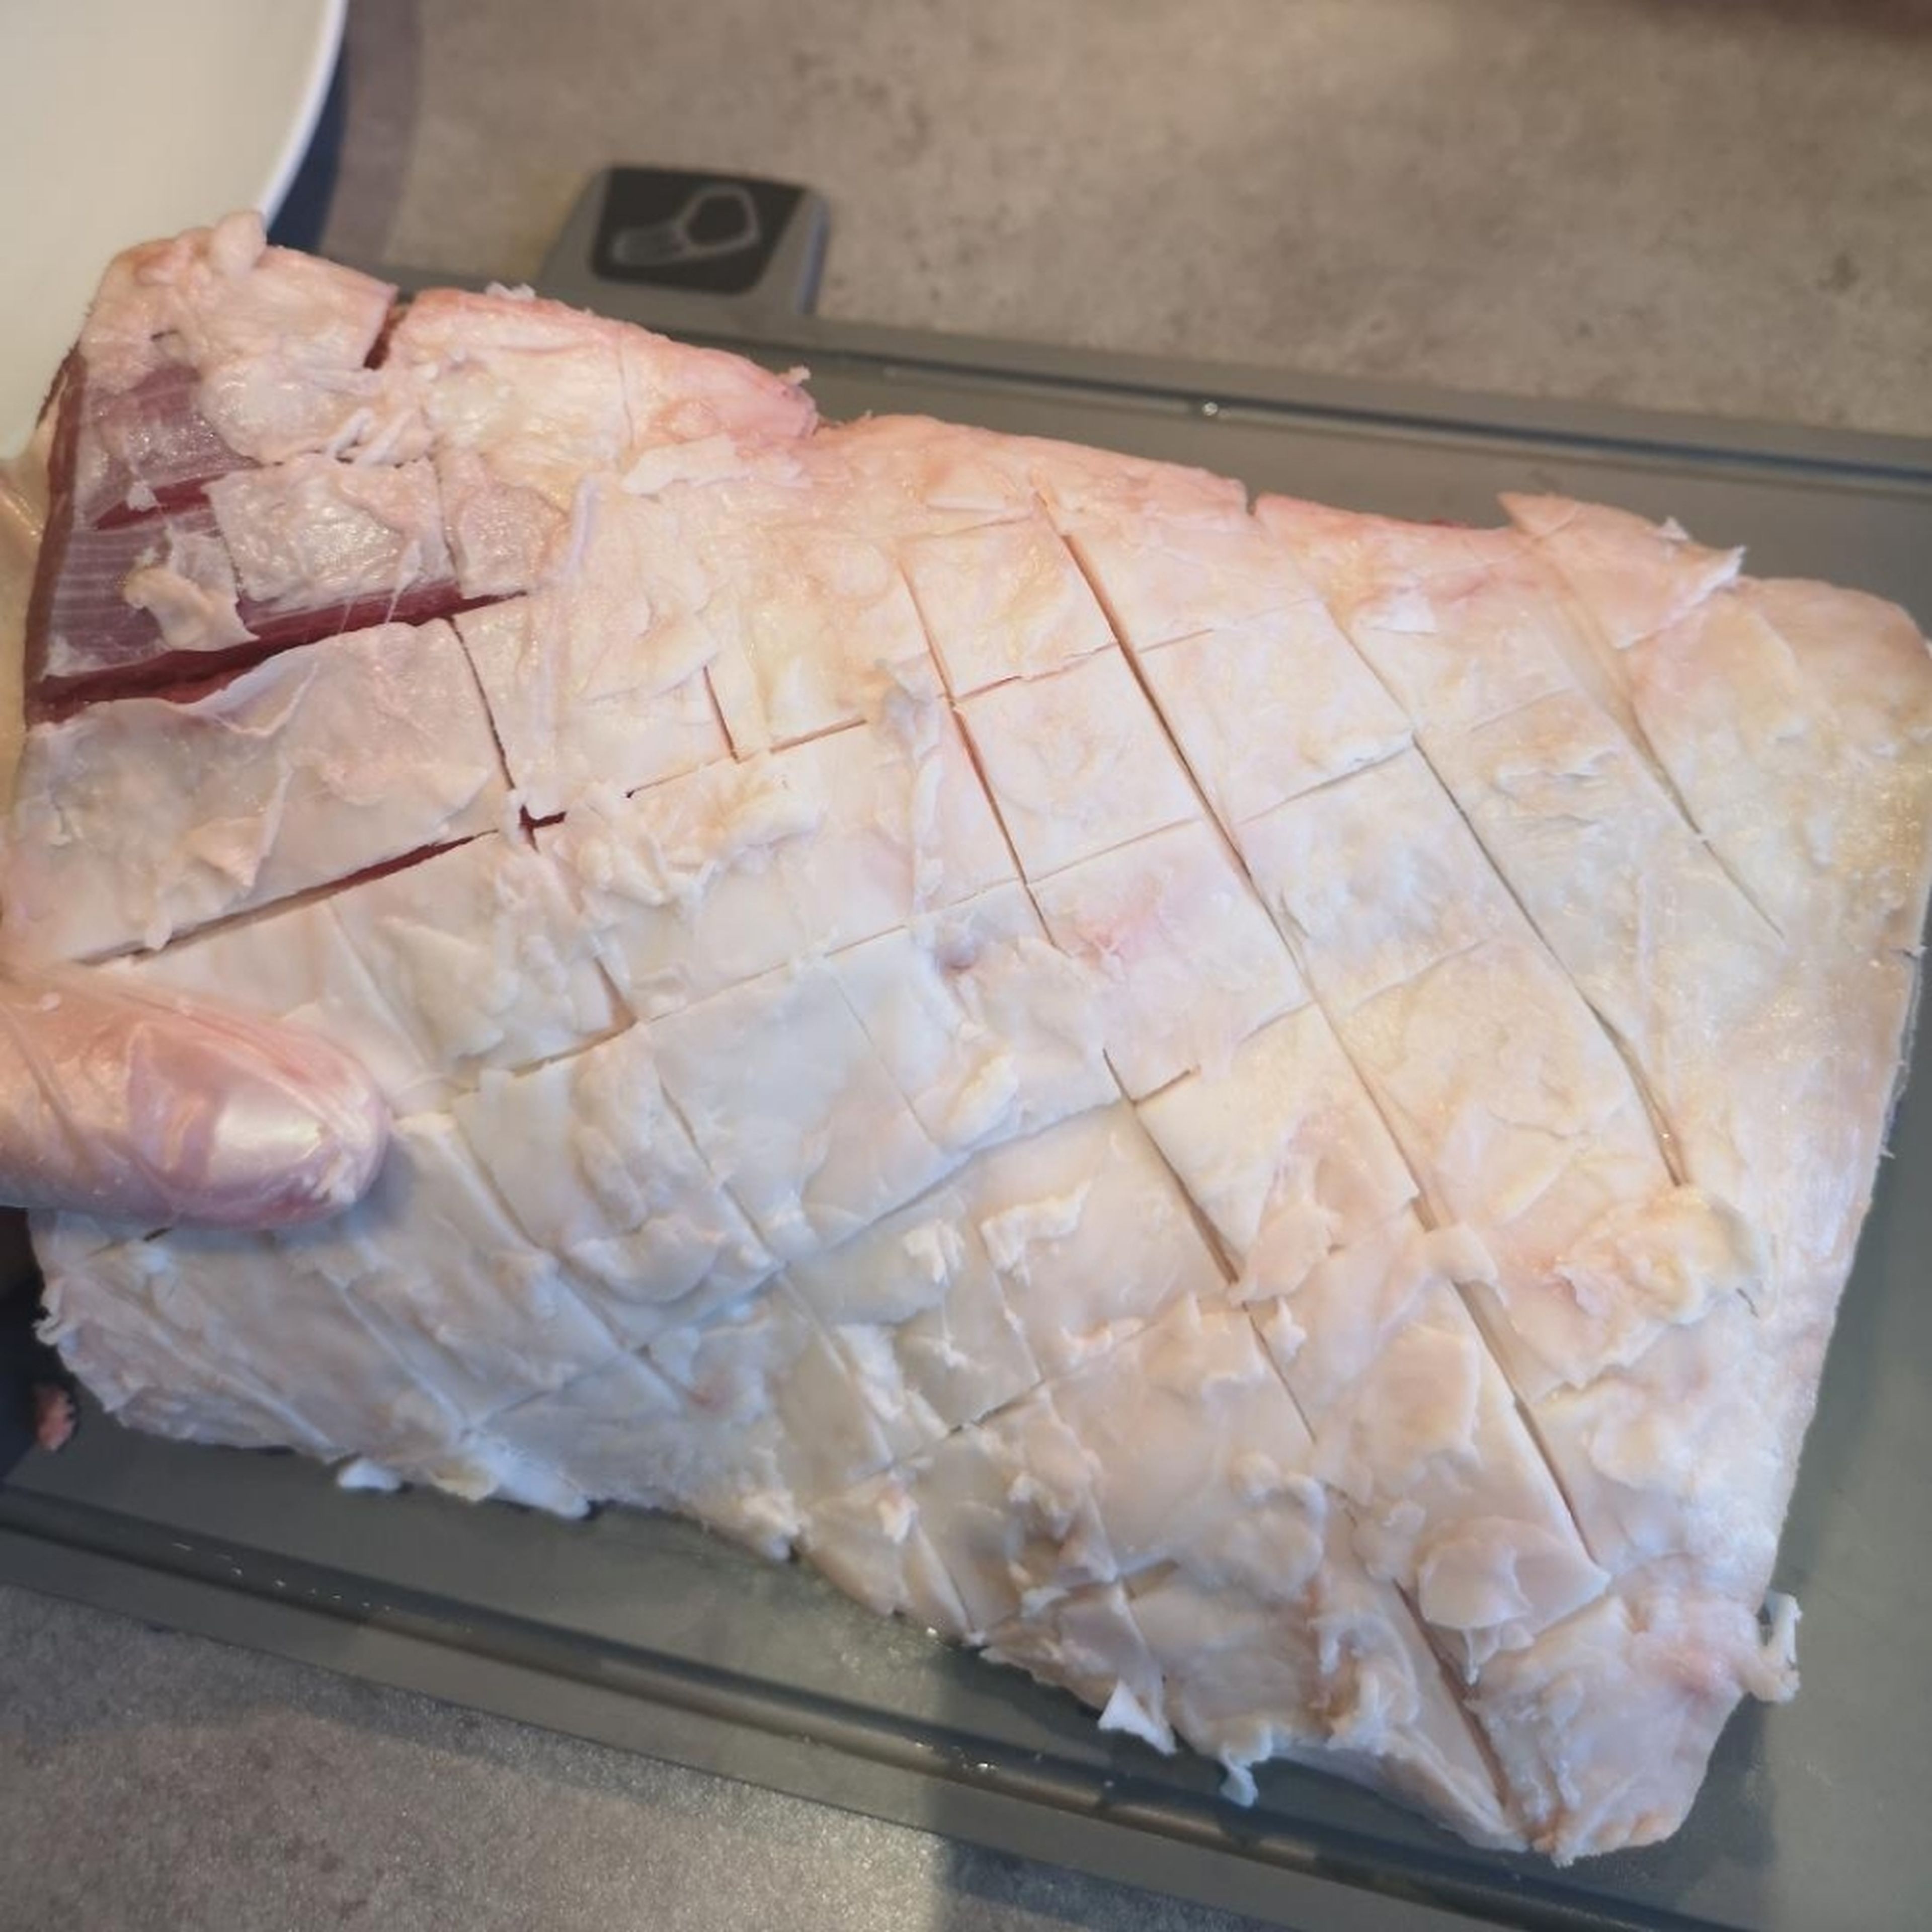 Score the fatty part of the rack, do it in a way that you don't cut too deep, you should only be scoring the fat, not the meat. Season generously with salt and pepper. tip: like to use a pairing knife to score as I feel it's easier with the short sharp blade.